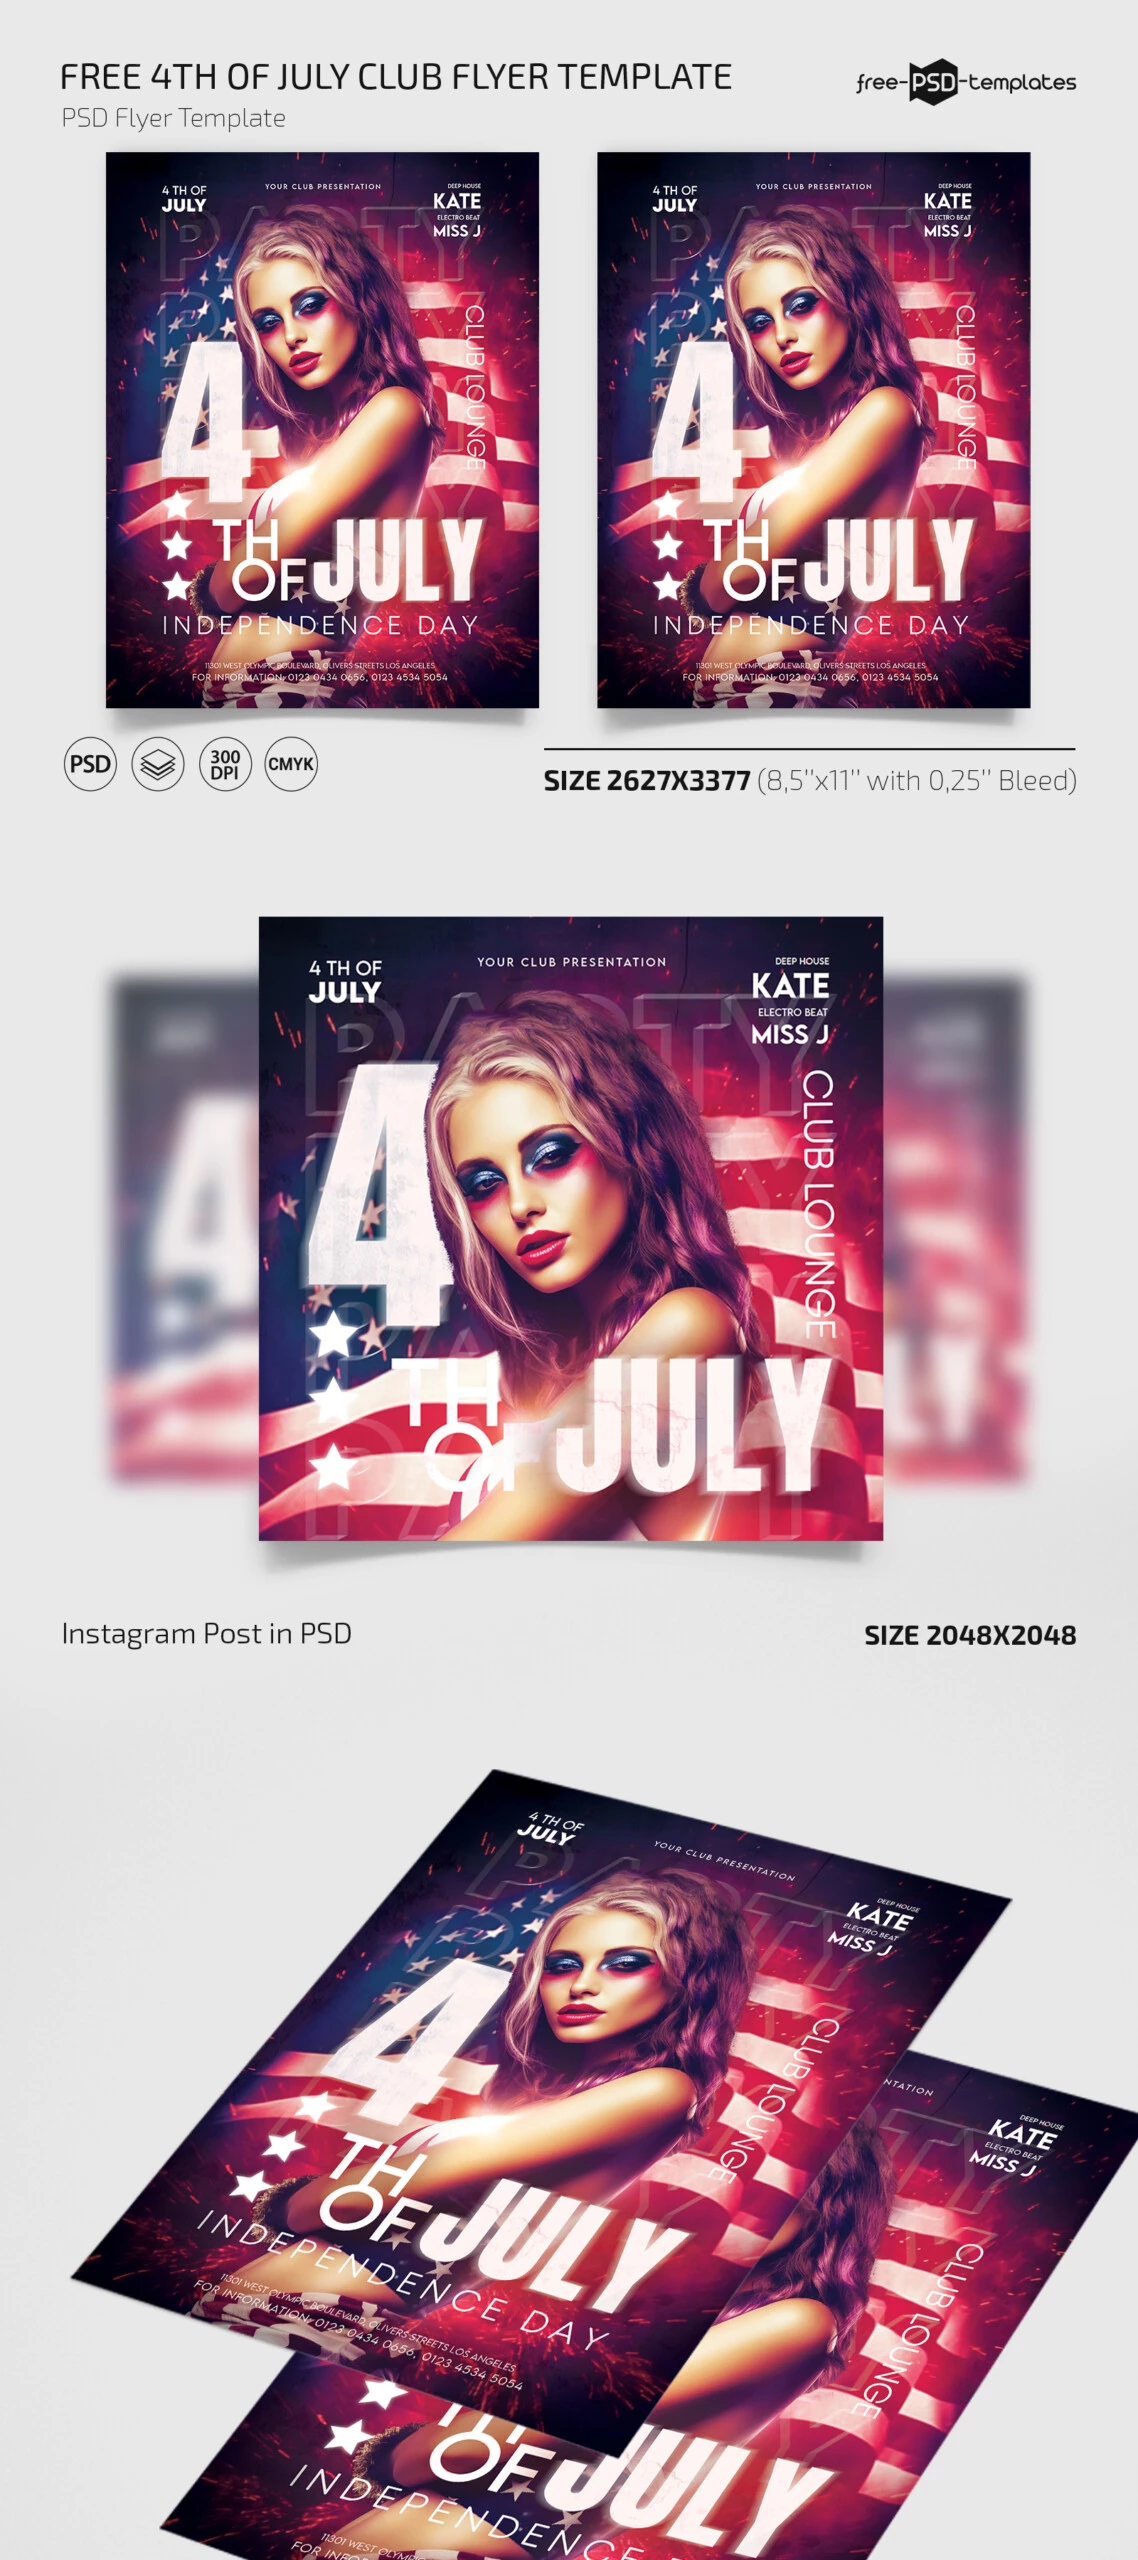 Free 4th of July Club Flyer Templates